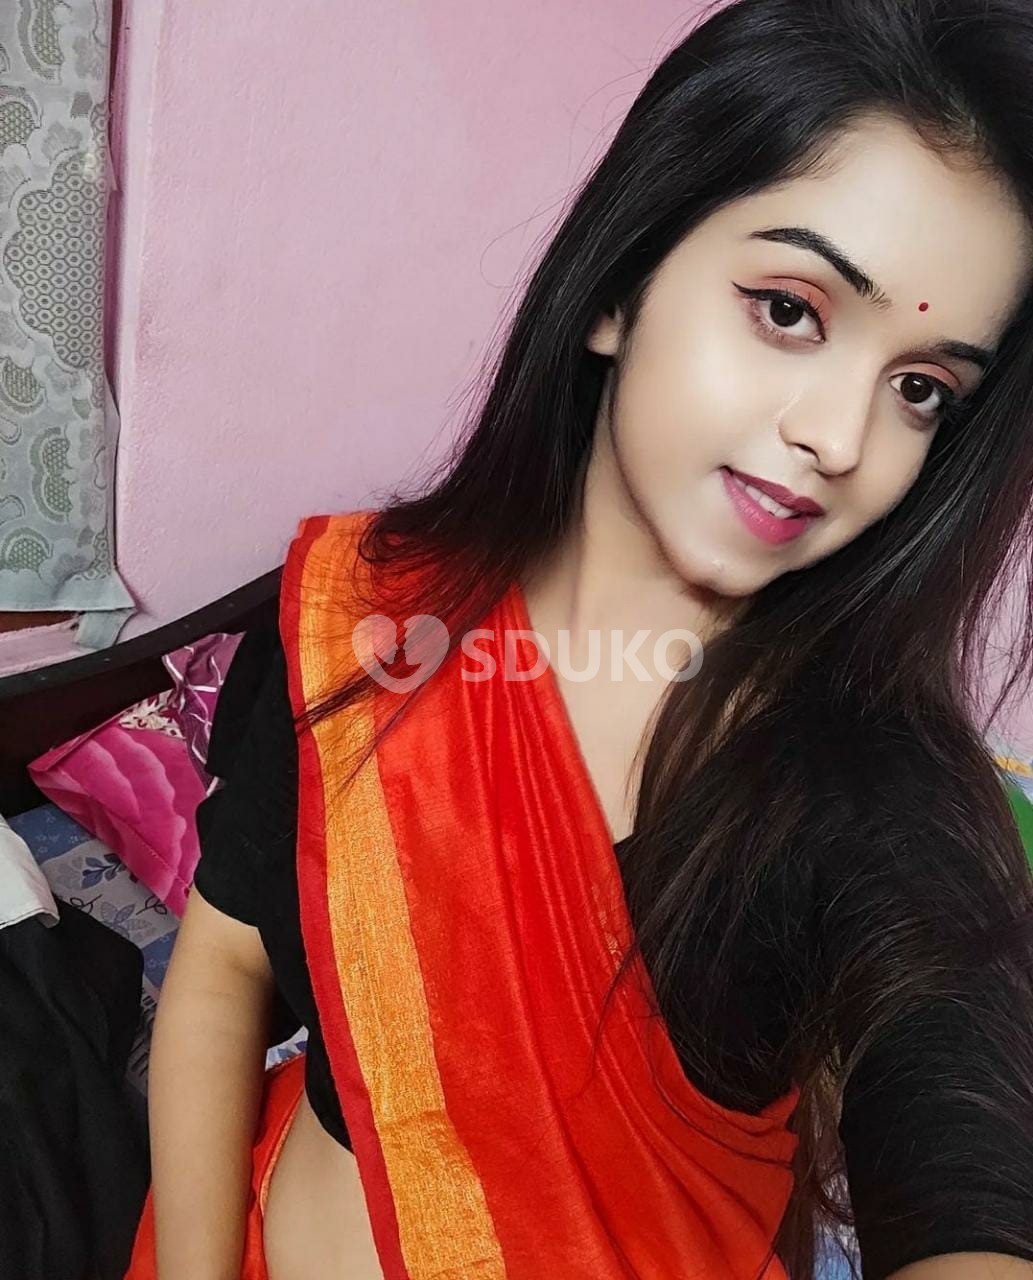 CALL ME 📞👉 Silvassa AFFORDABLE price █▬█⓿▀█▀ college girls aunties doorstep outcall incall service